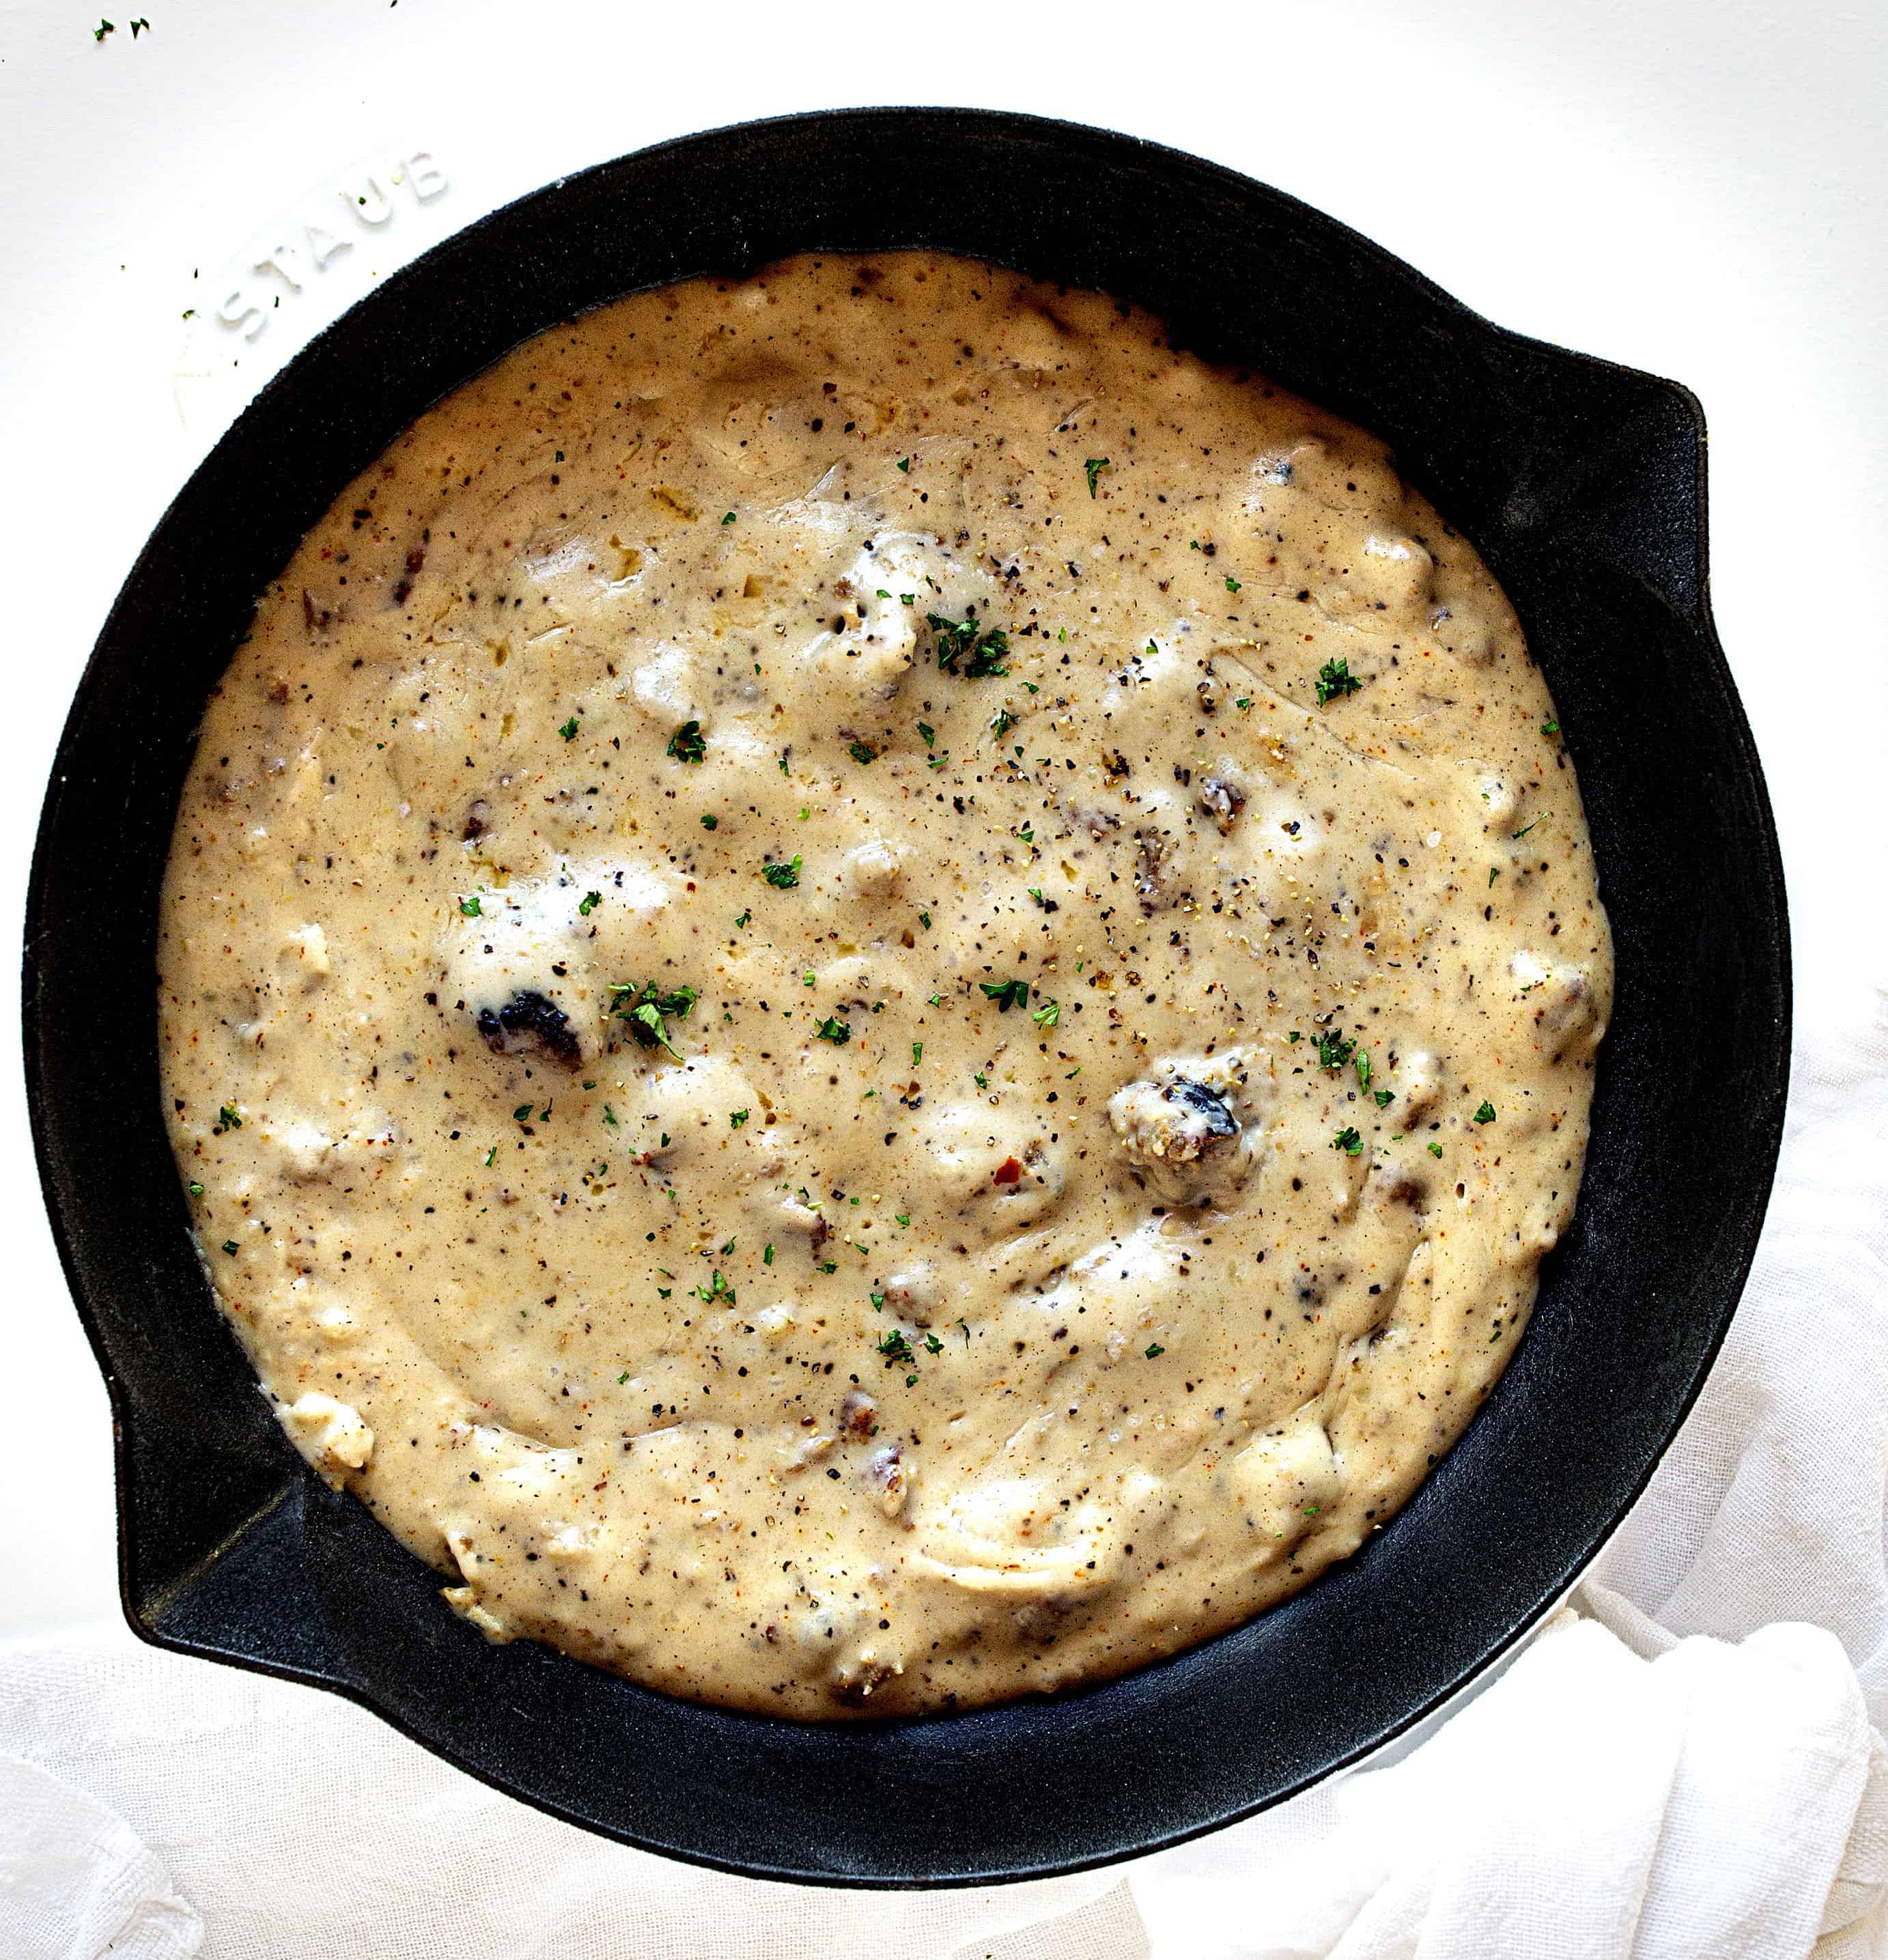 Skillet of Sausage Gravy for Biscuits and Gravy